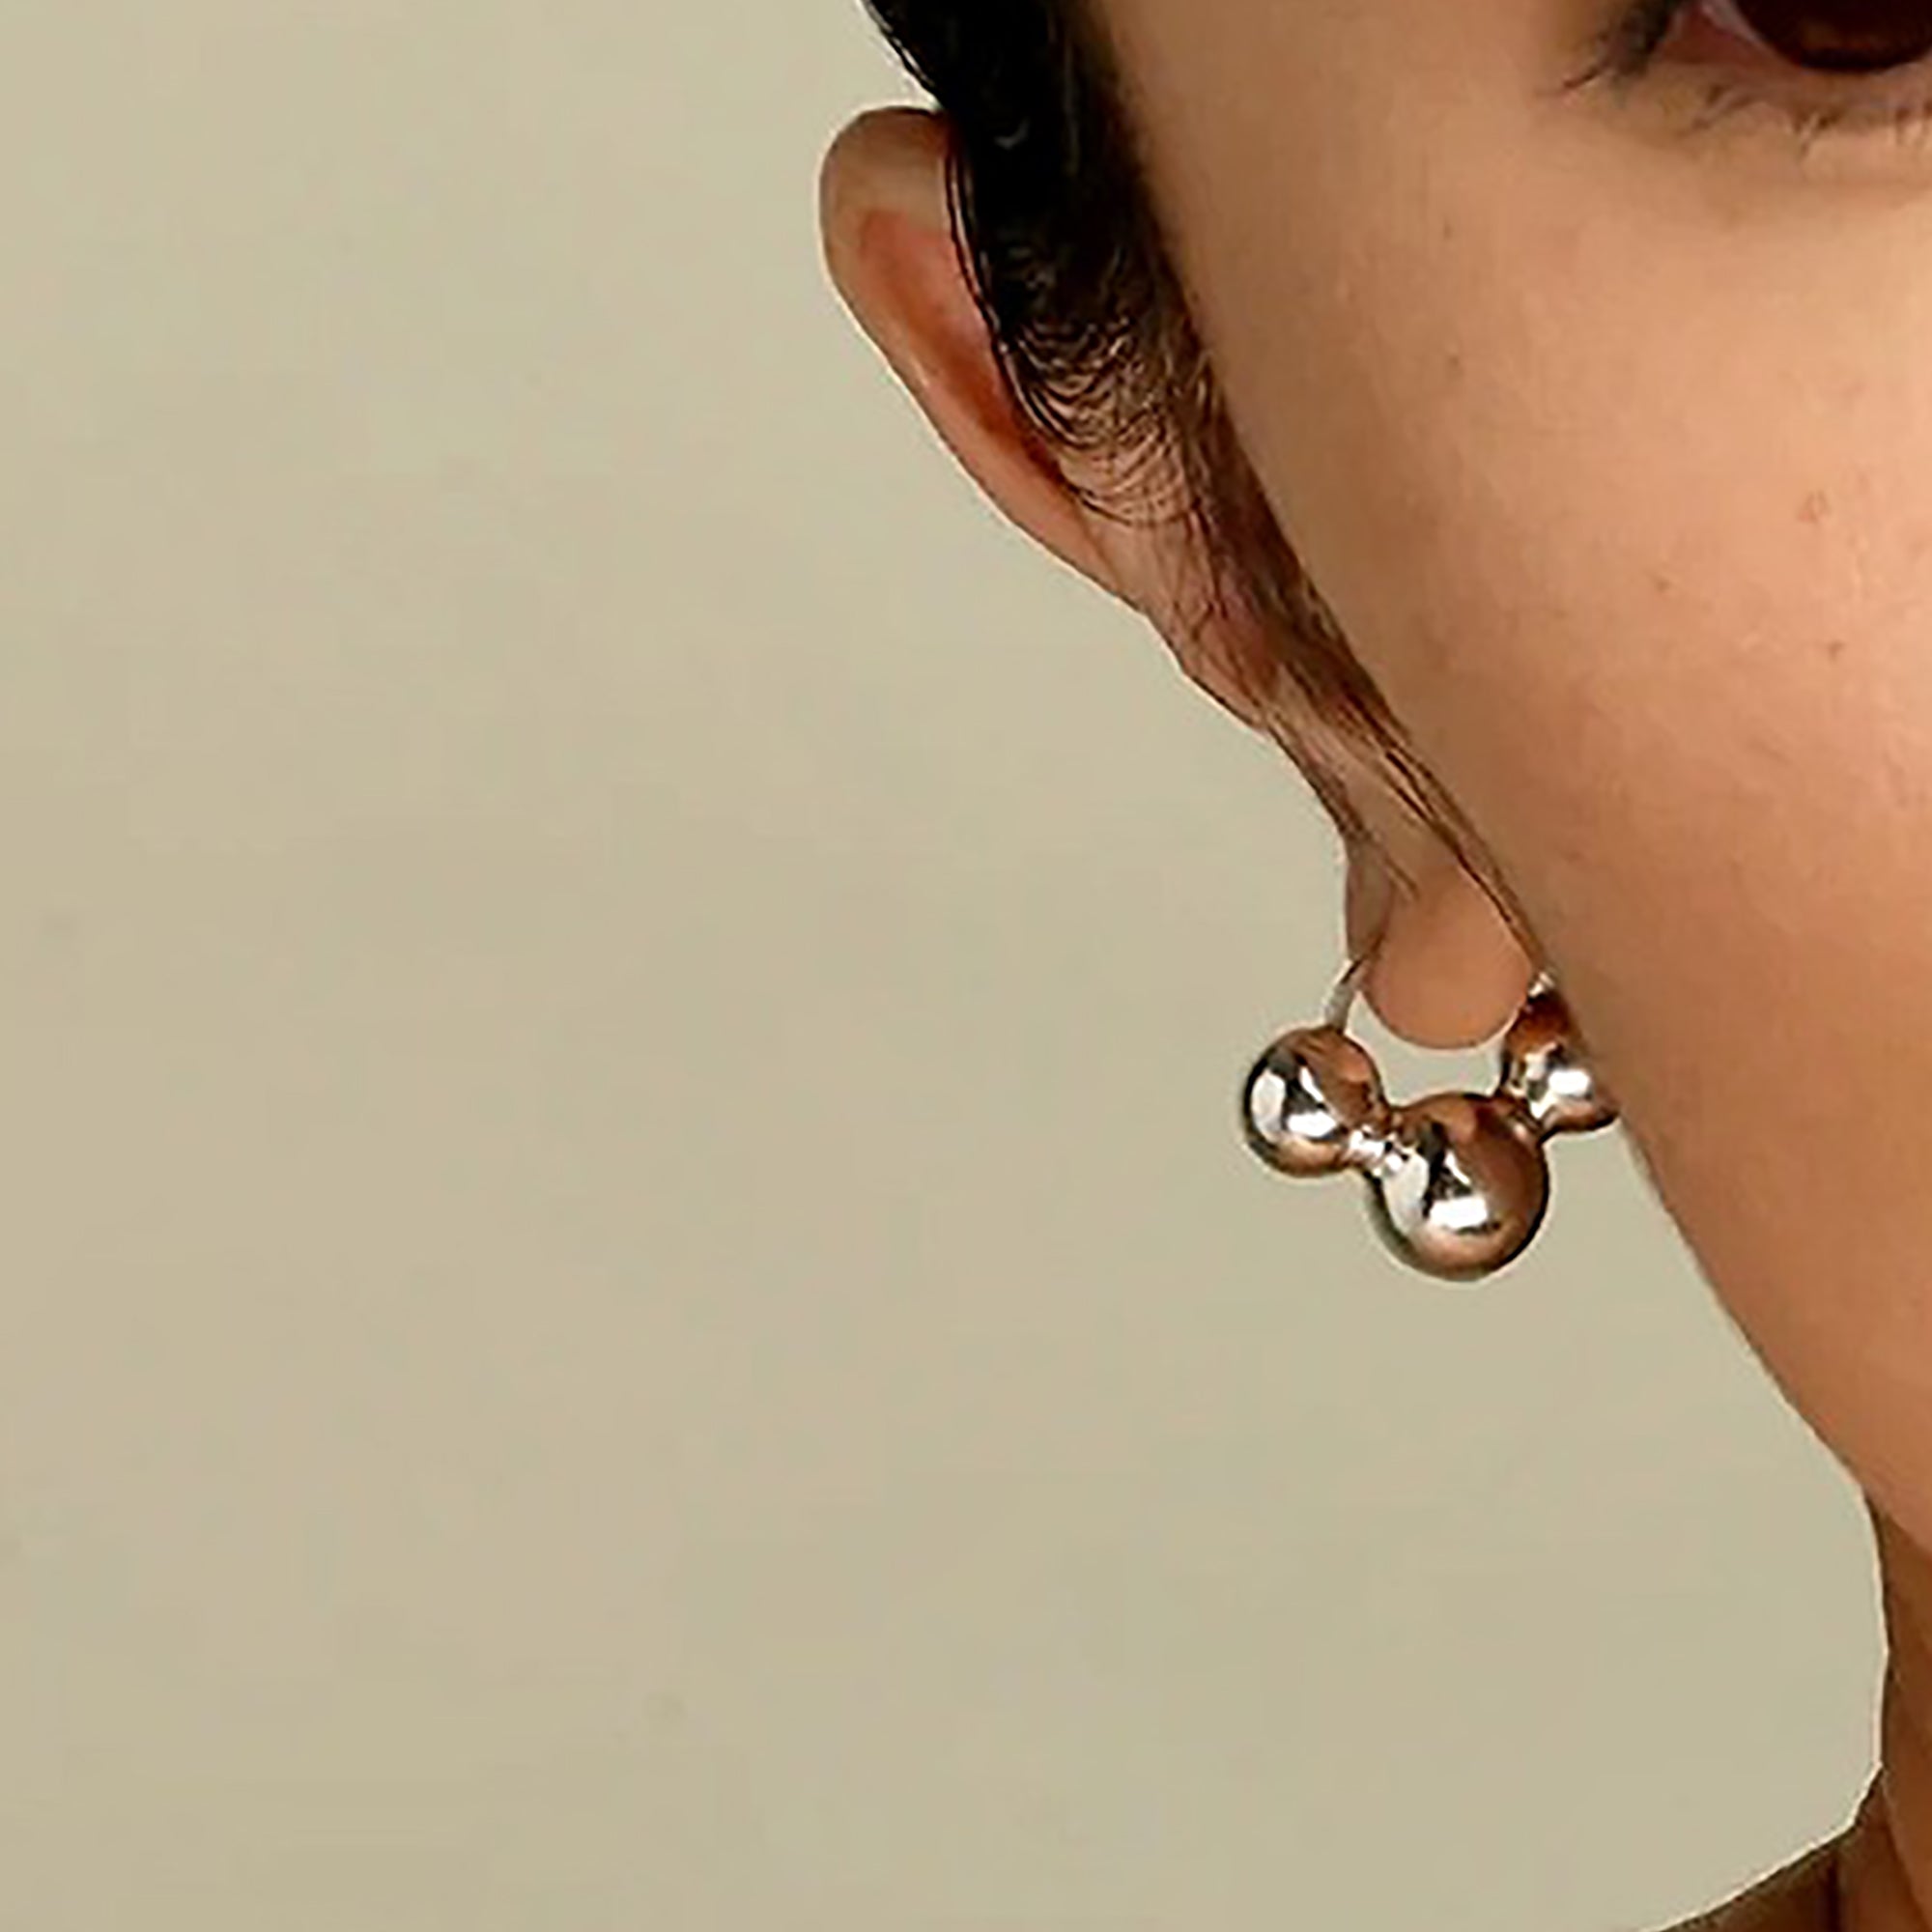 Gold Plated Metal Ball Hoop Earrings Valentine Day Gift